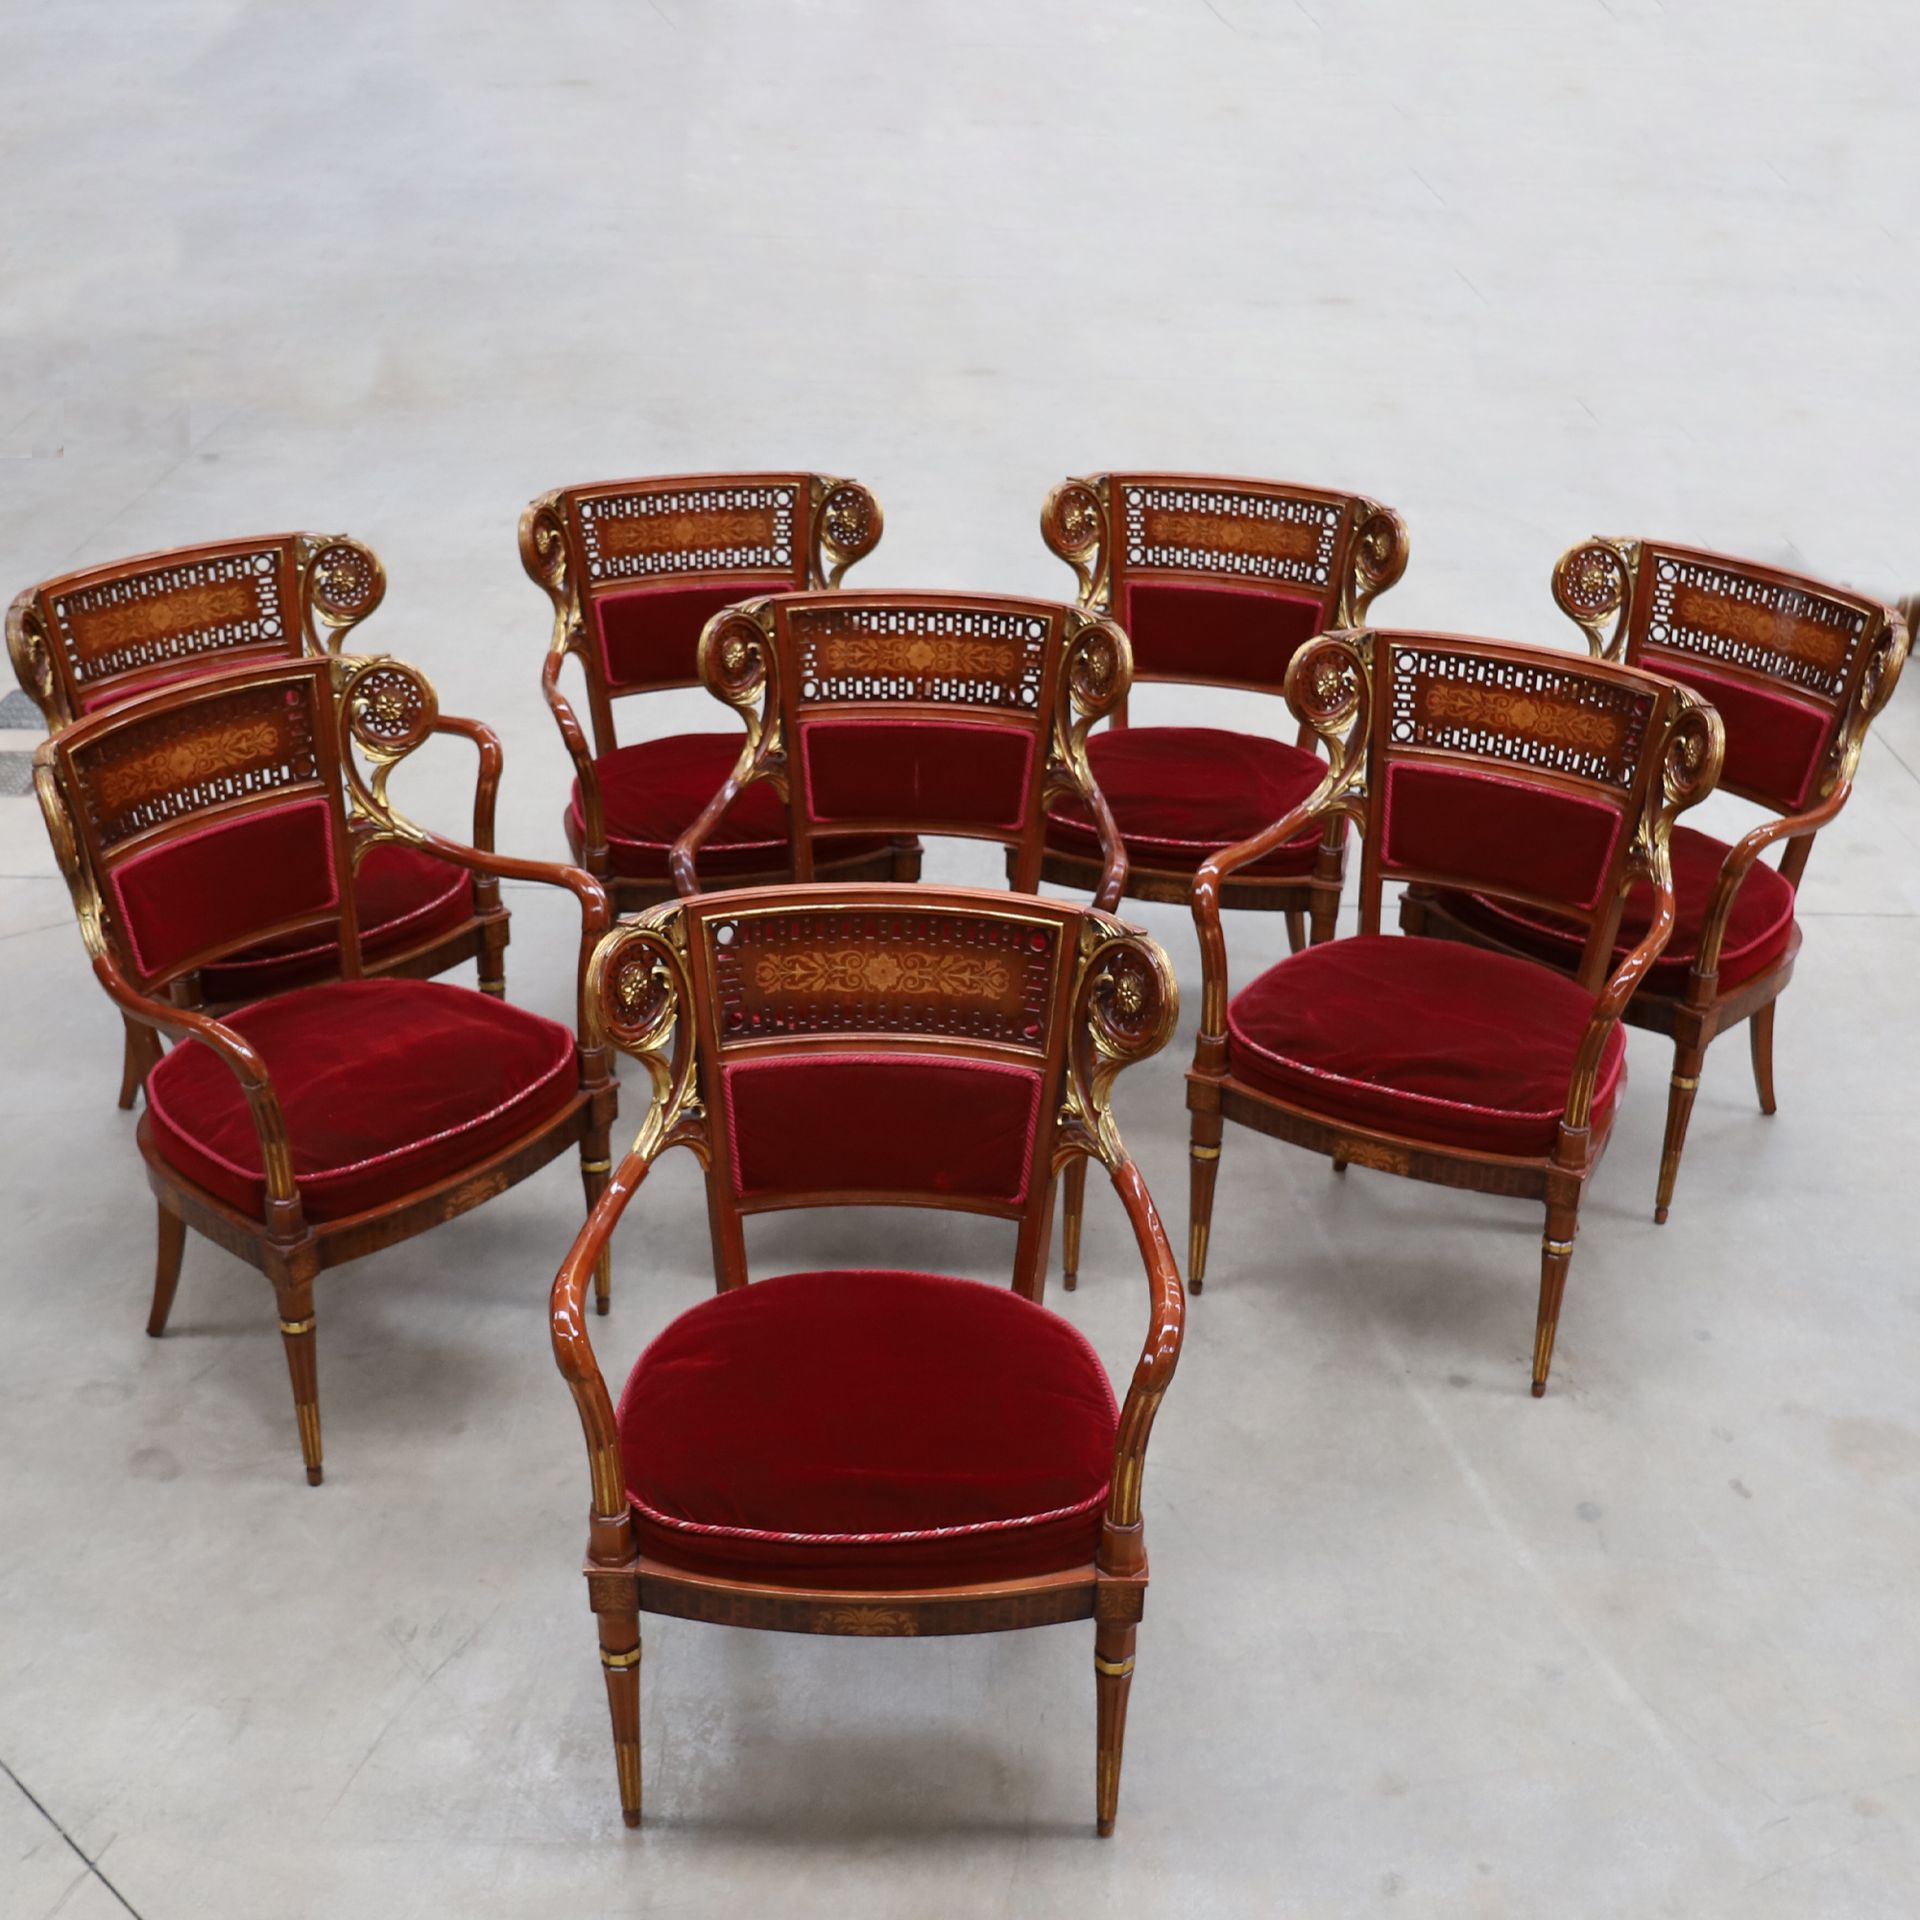 Null SET OF EIGHT HIGH QUALITY RUSSIAN CASHWOOD CHAIRS, 19th century

Slightly c&hellip;